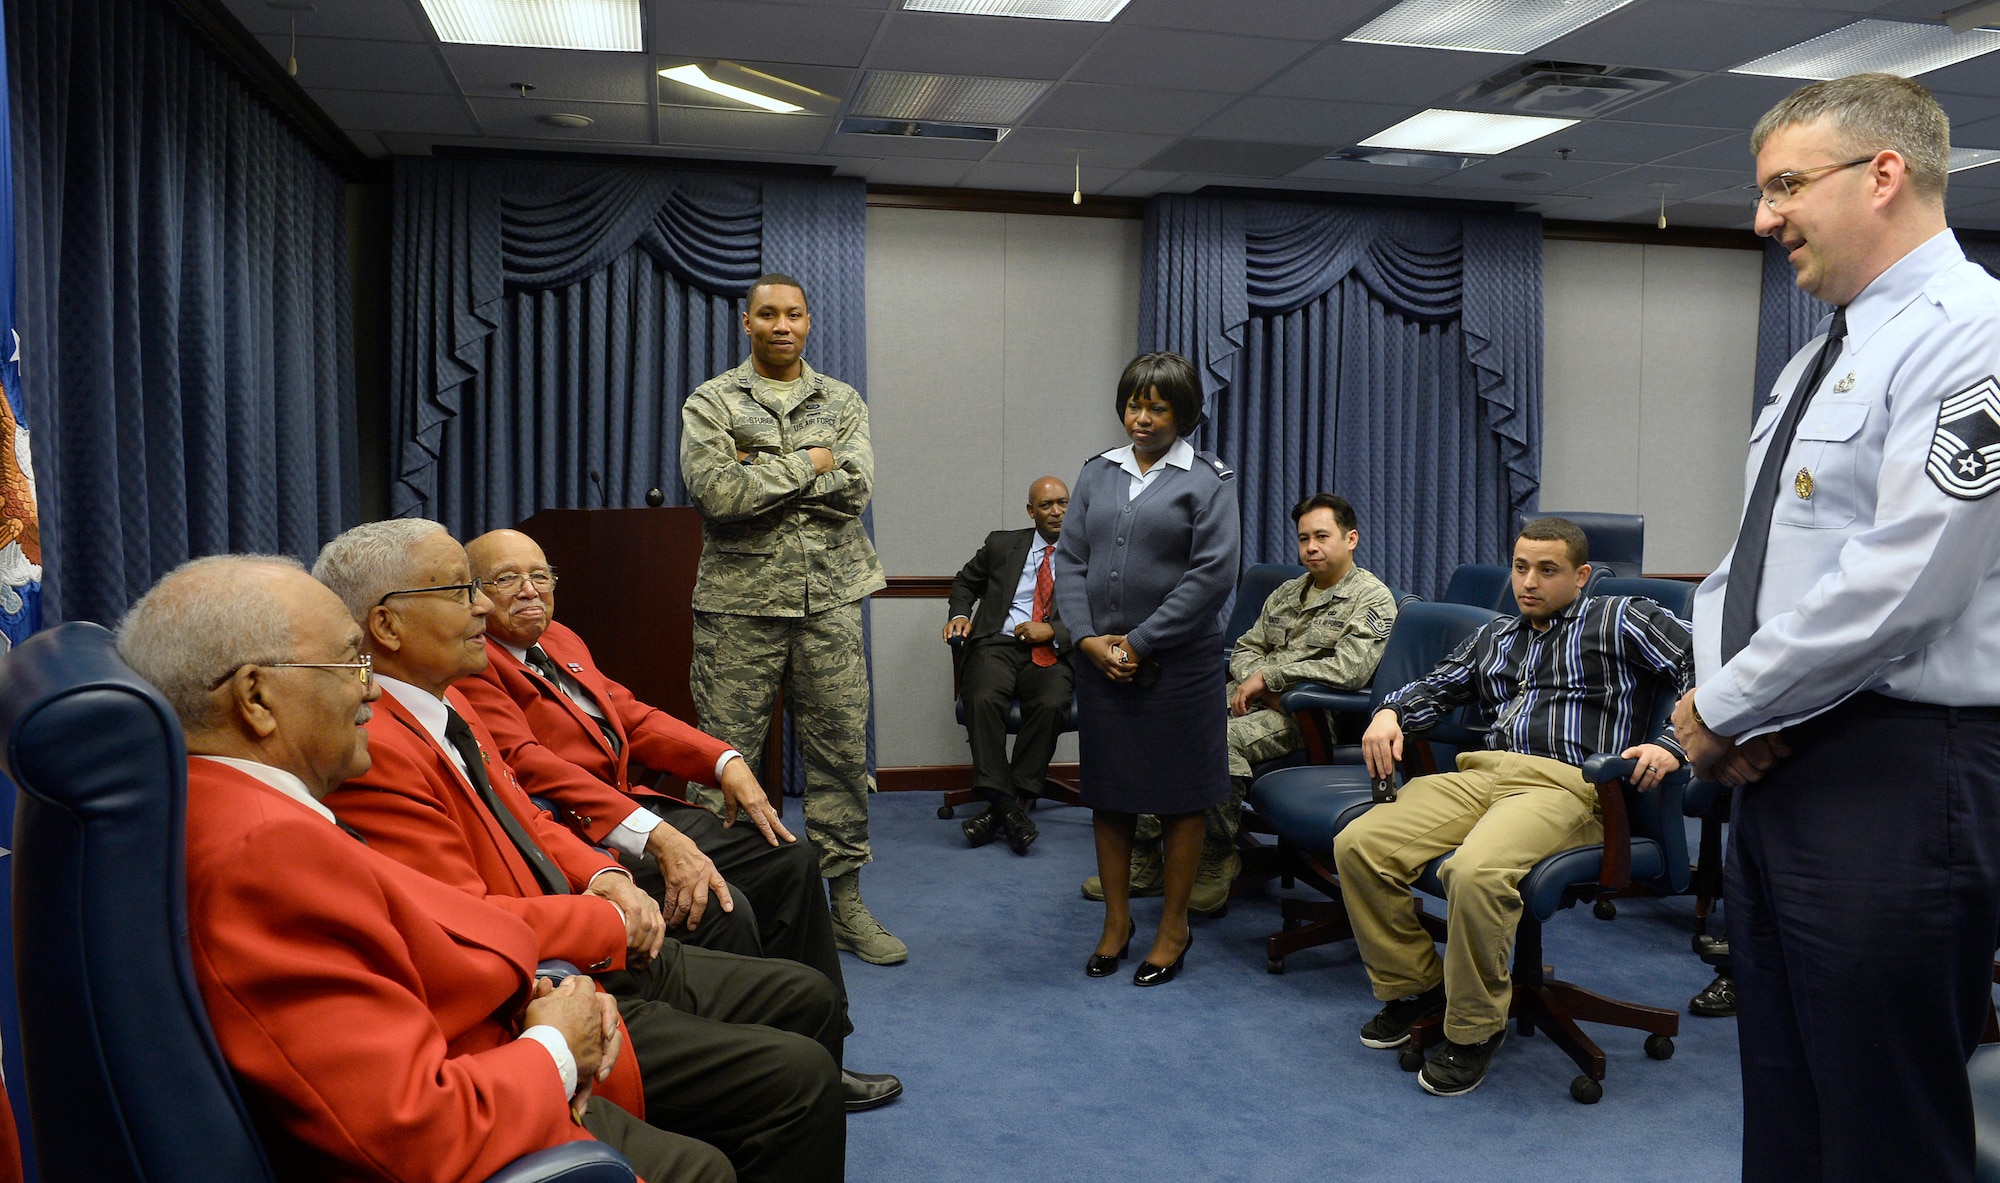 Tuskegee Airmen former Cadet William Fauntroy Jr., retired Col. Charles McGee and former Cadet Walter Robinson Sr. share their stories with a group of Airmen and civilians at the Pentagon Feb. 16; 2016. (U.S. Air Force photo/Scott M. Ash)